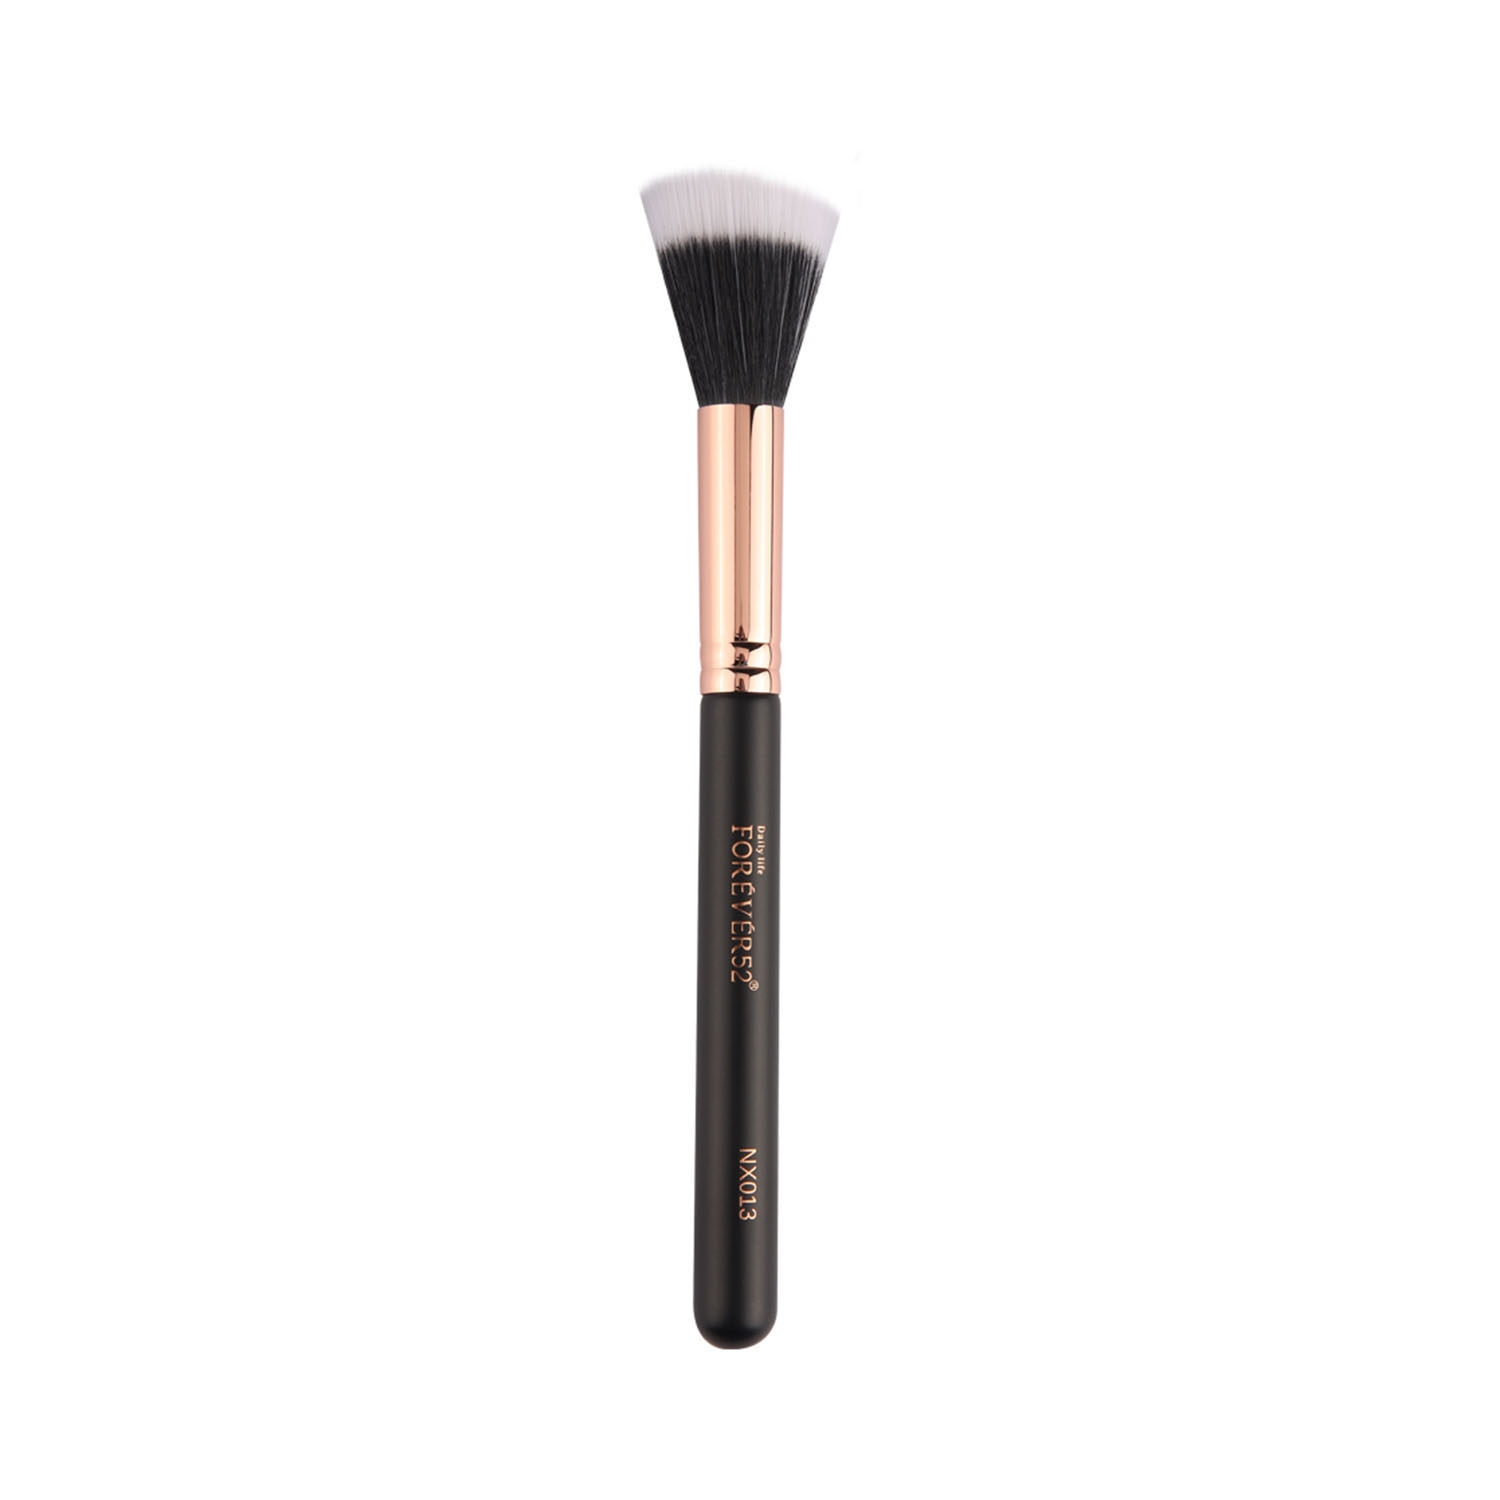 Daily Life Forever52 | Daily Life Forever52 Duo Fiber Brush - NX013 (1Pc)